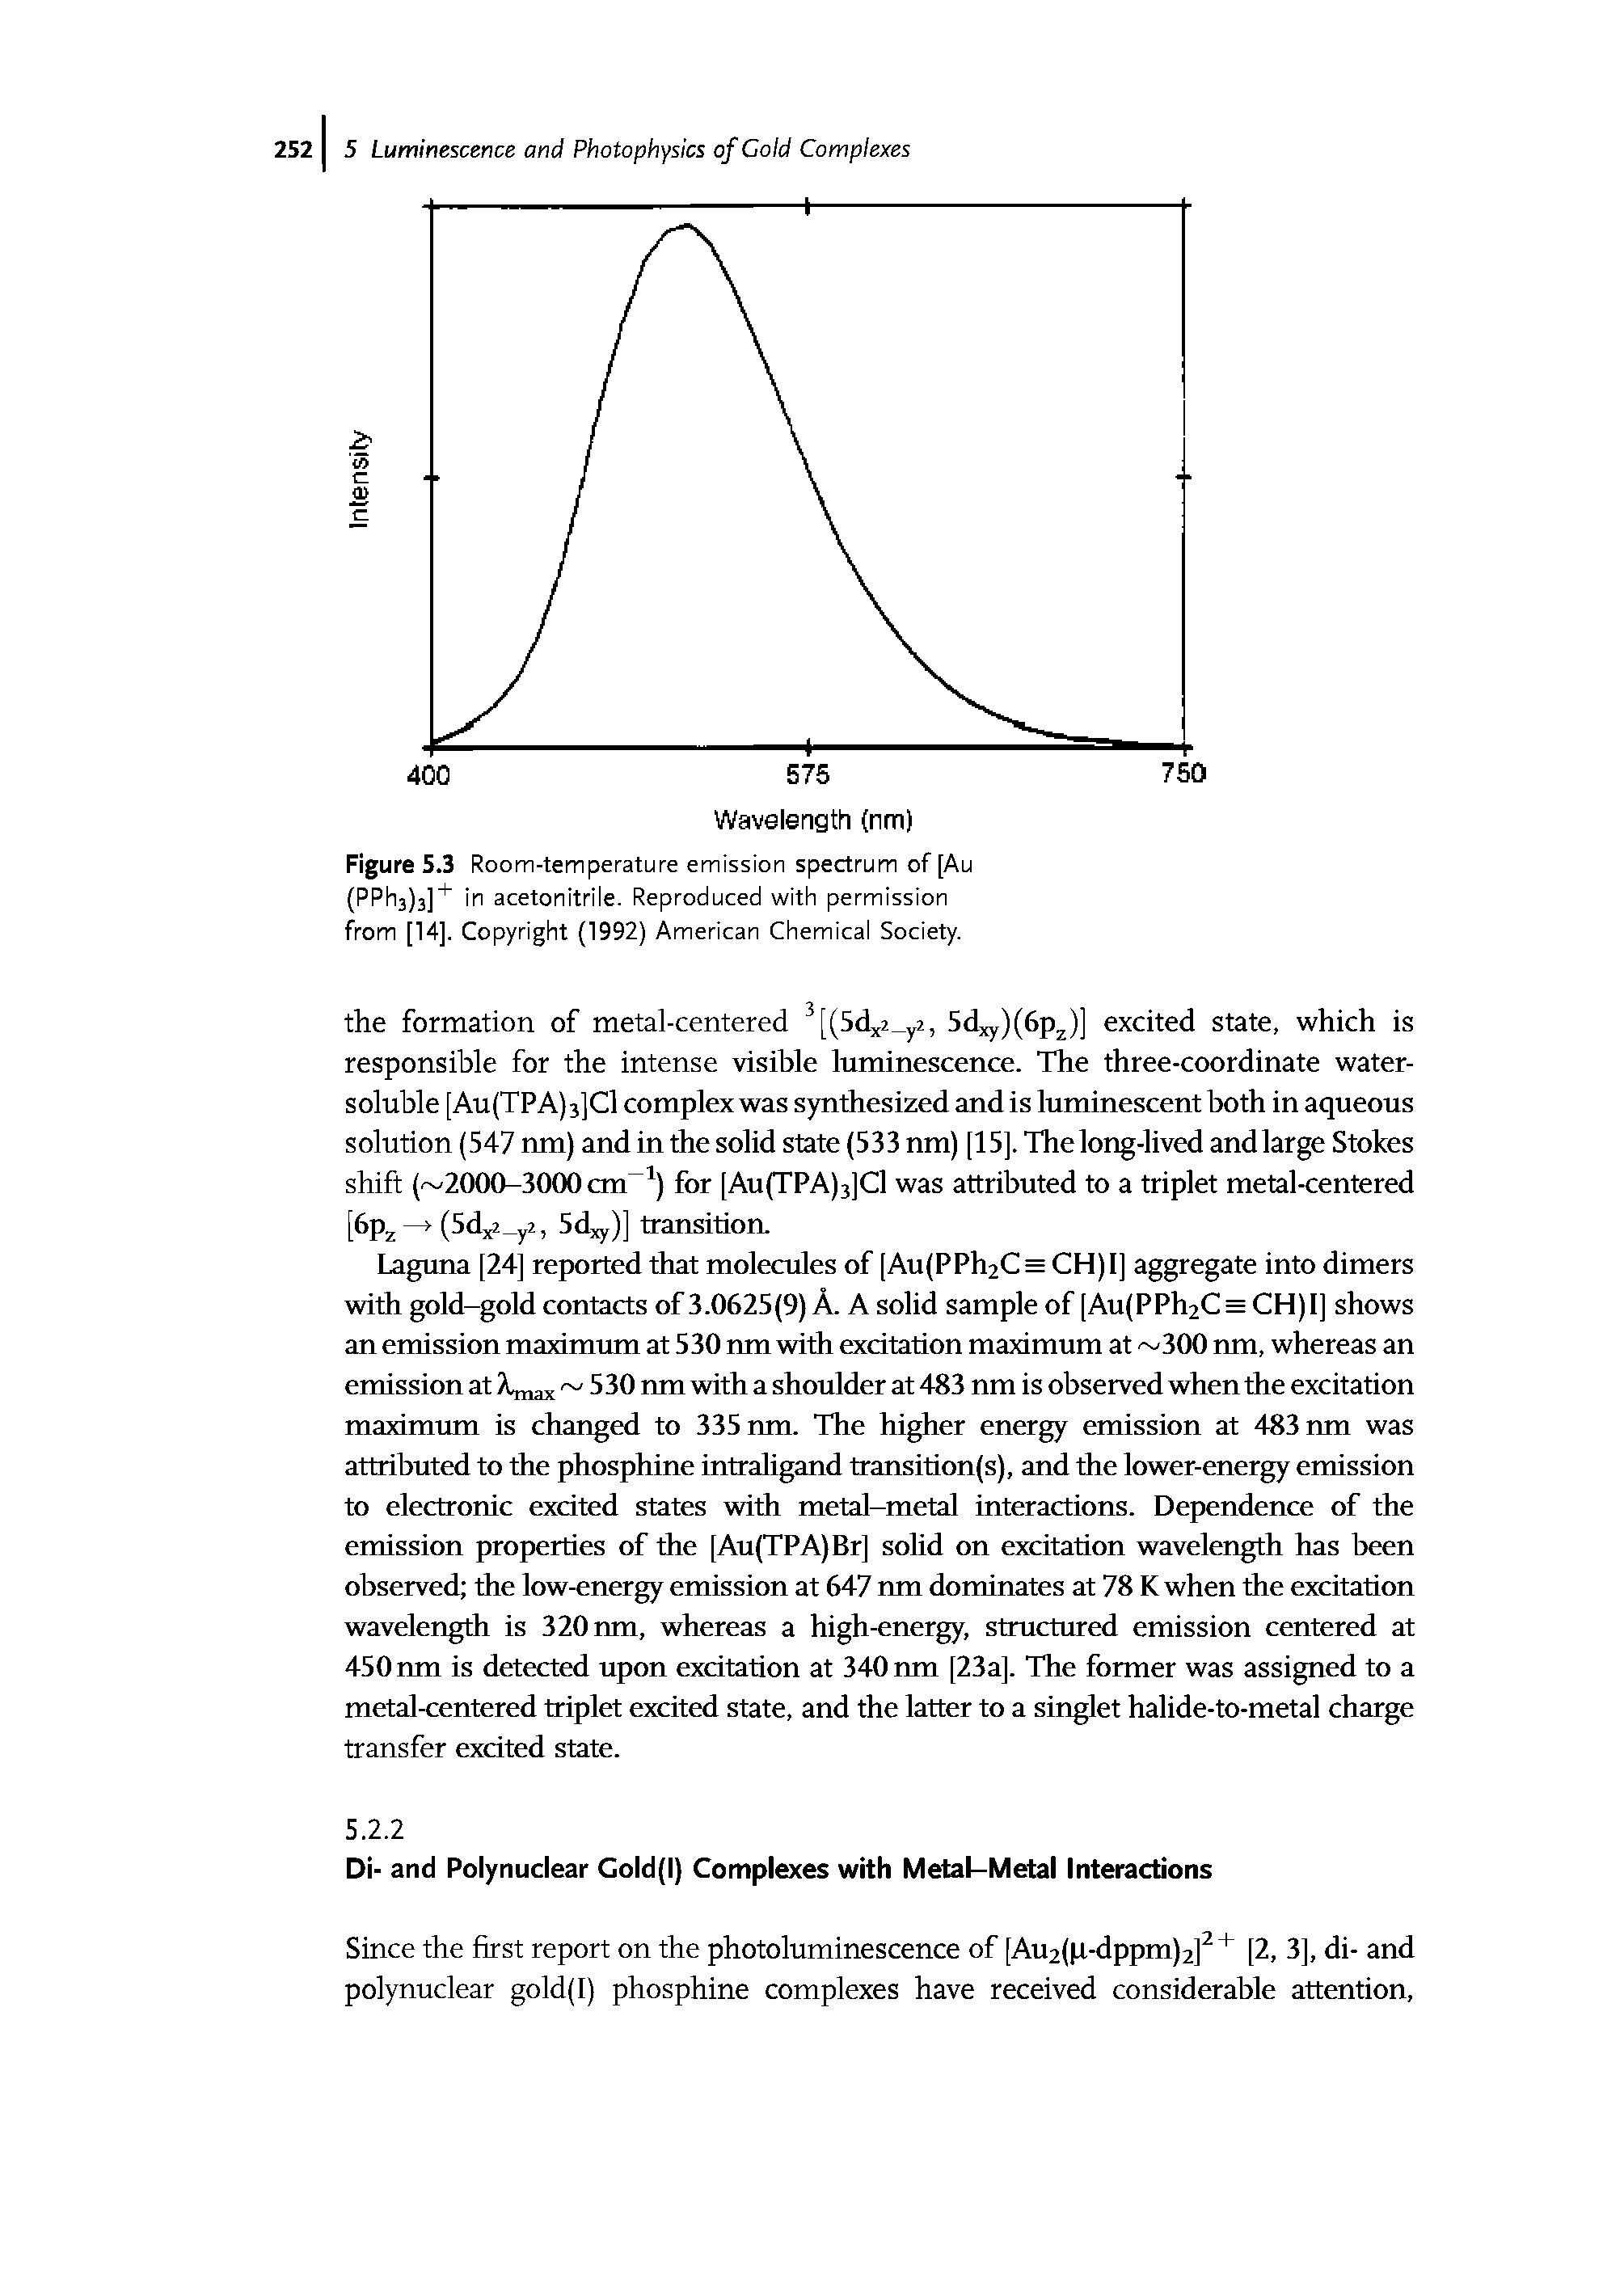 Figure 5.3 Room-temperature emission spectrum of [Au (PPh3)3] in acetonitrile. Reproduced with permission from [14]. Copyright (1992) American Chemical Society.